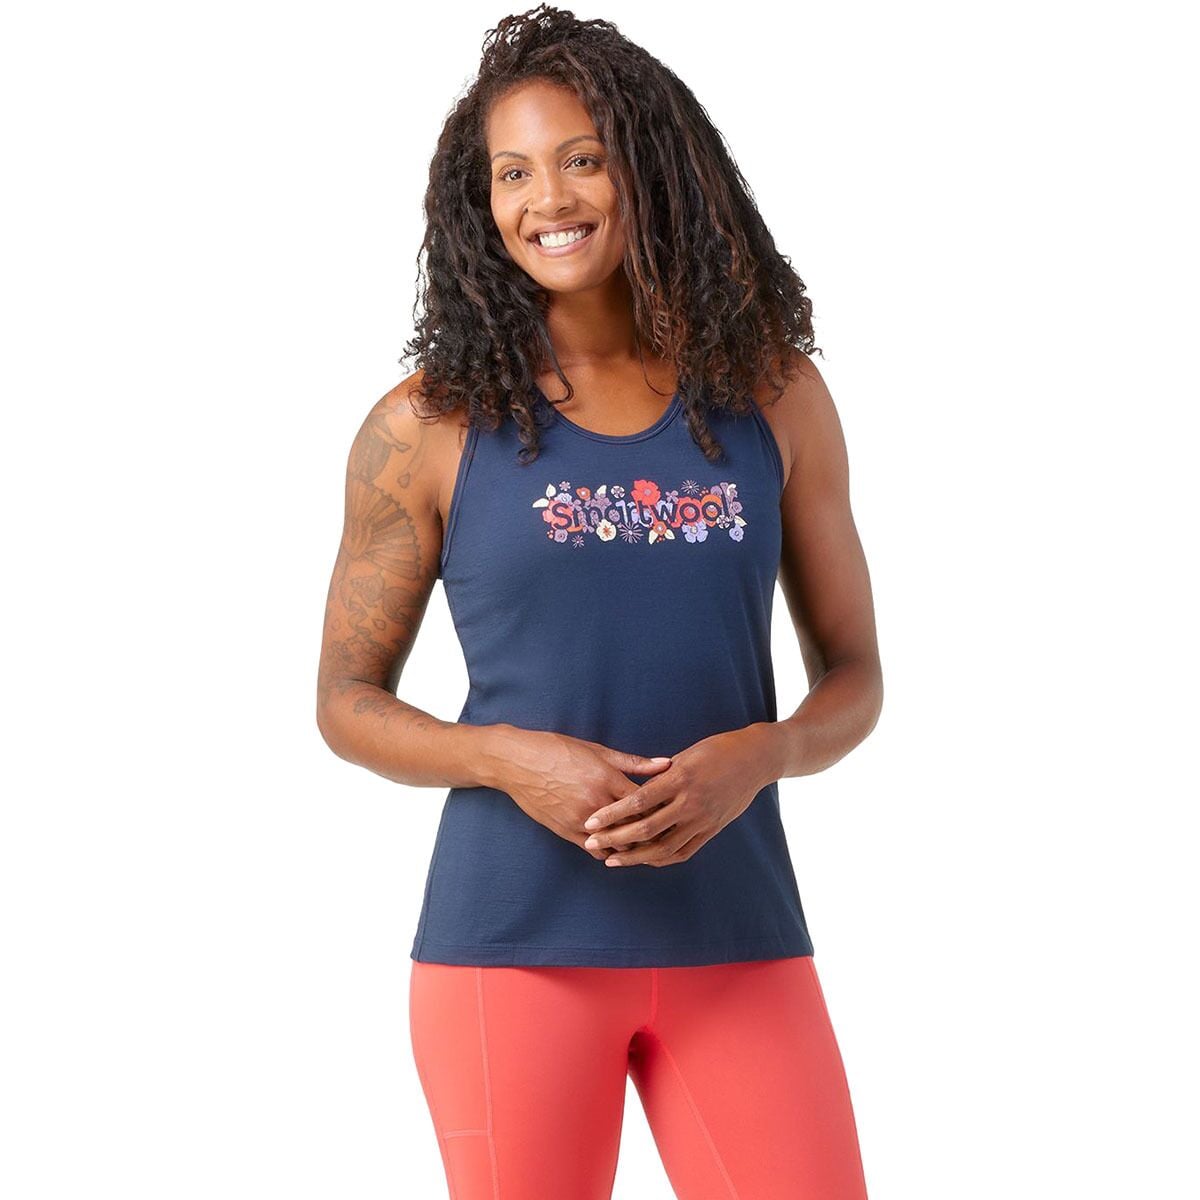 Smartwool Floral Meadow Graphic Tank Top - Women's